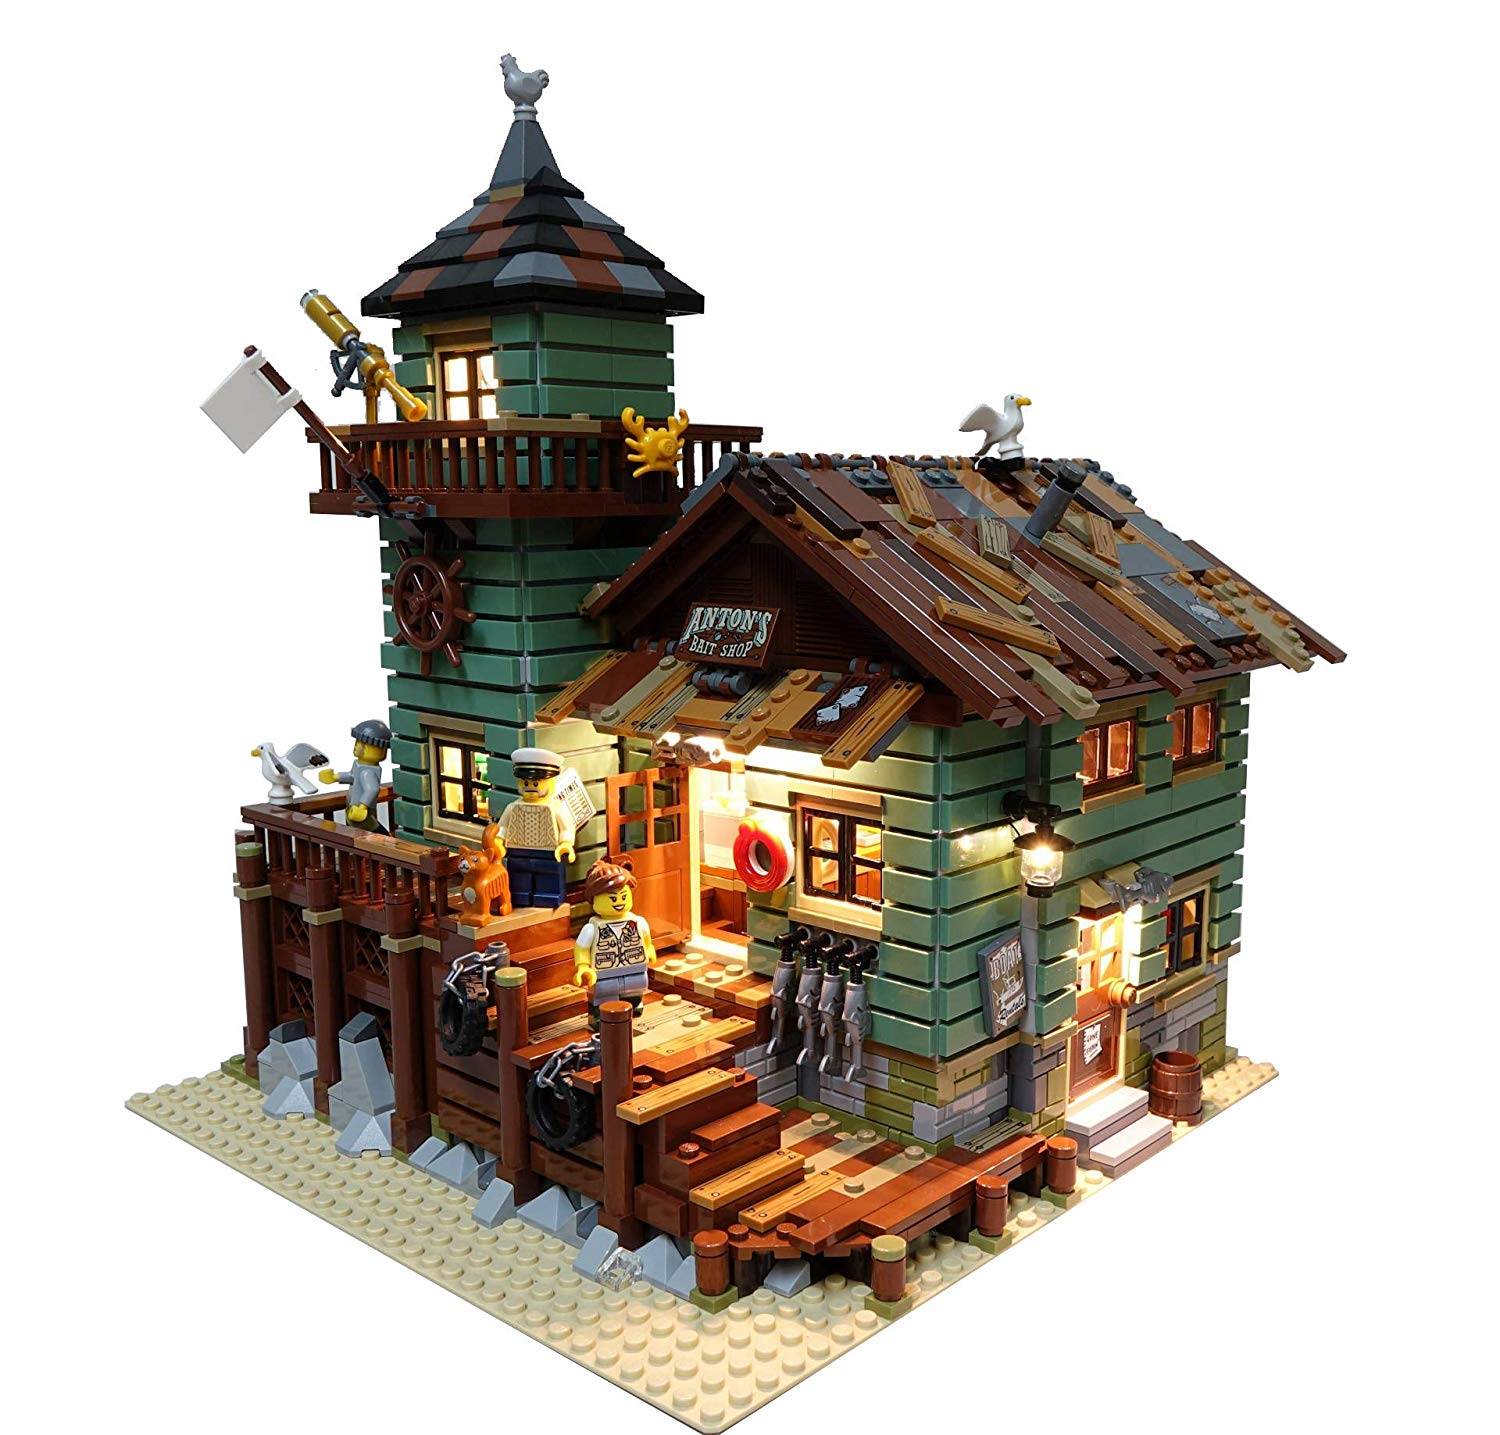 LEGO Old Fishing Store 21310